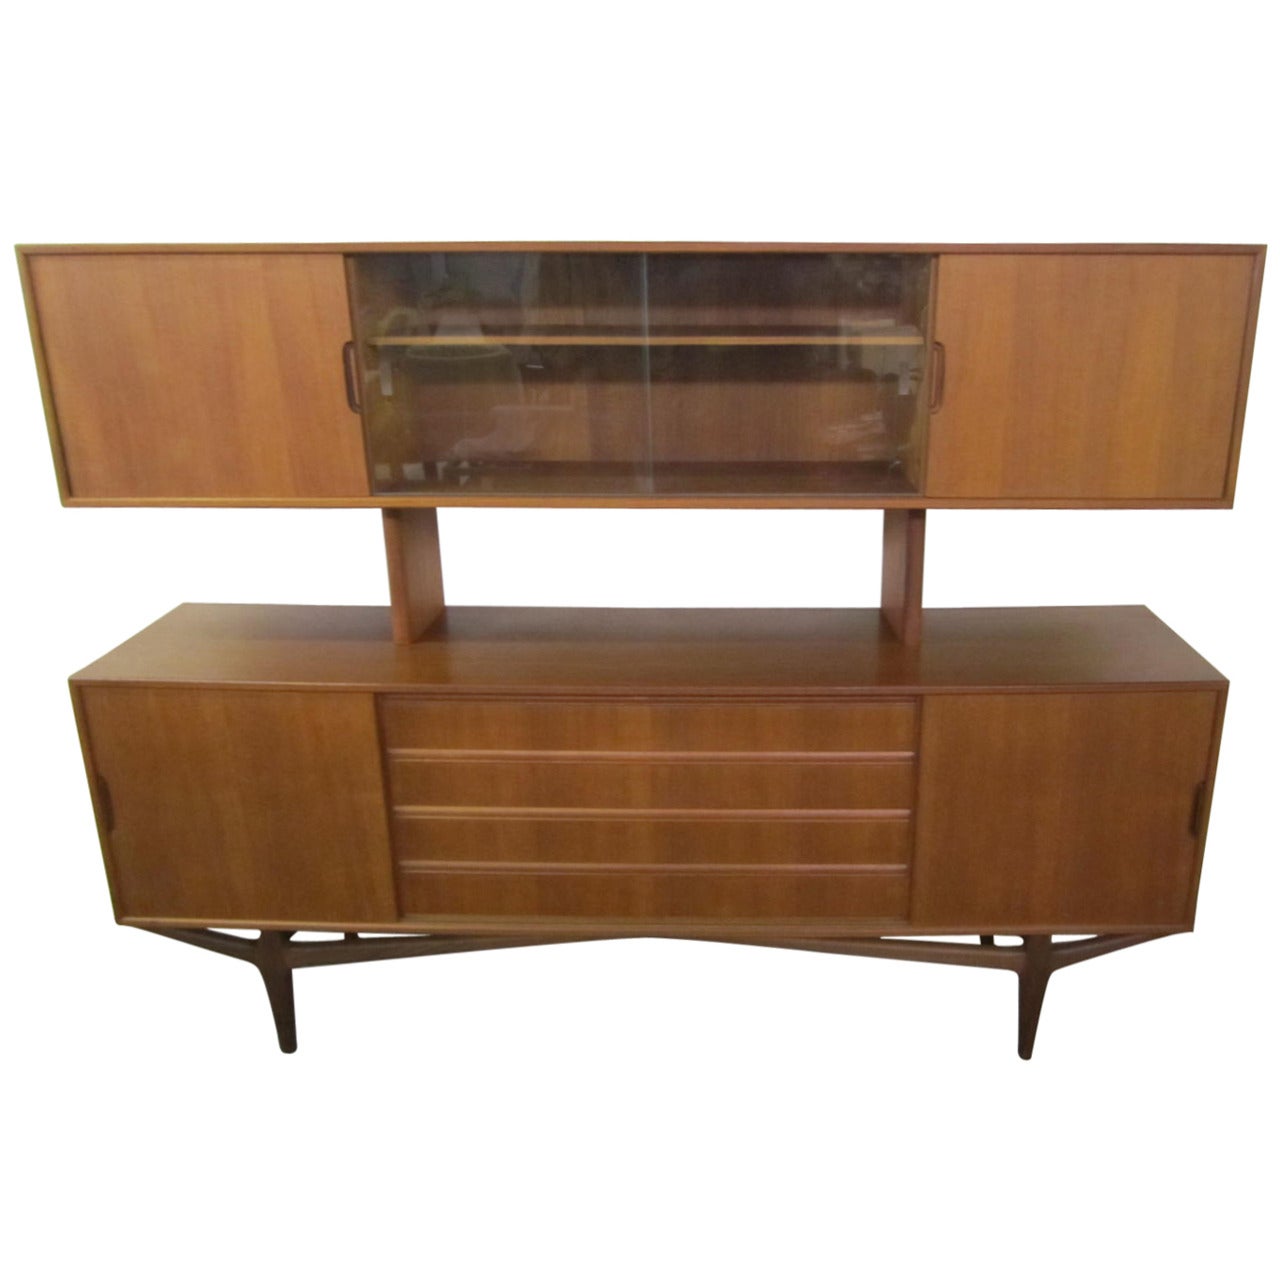 Lovely Teak Danish Credenza with Floating Hutch Room Divider, Unusual Legs For Sale